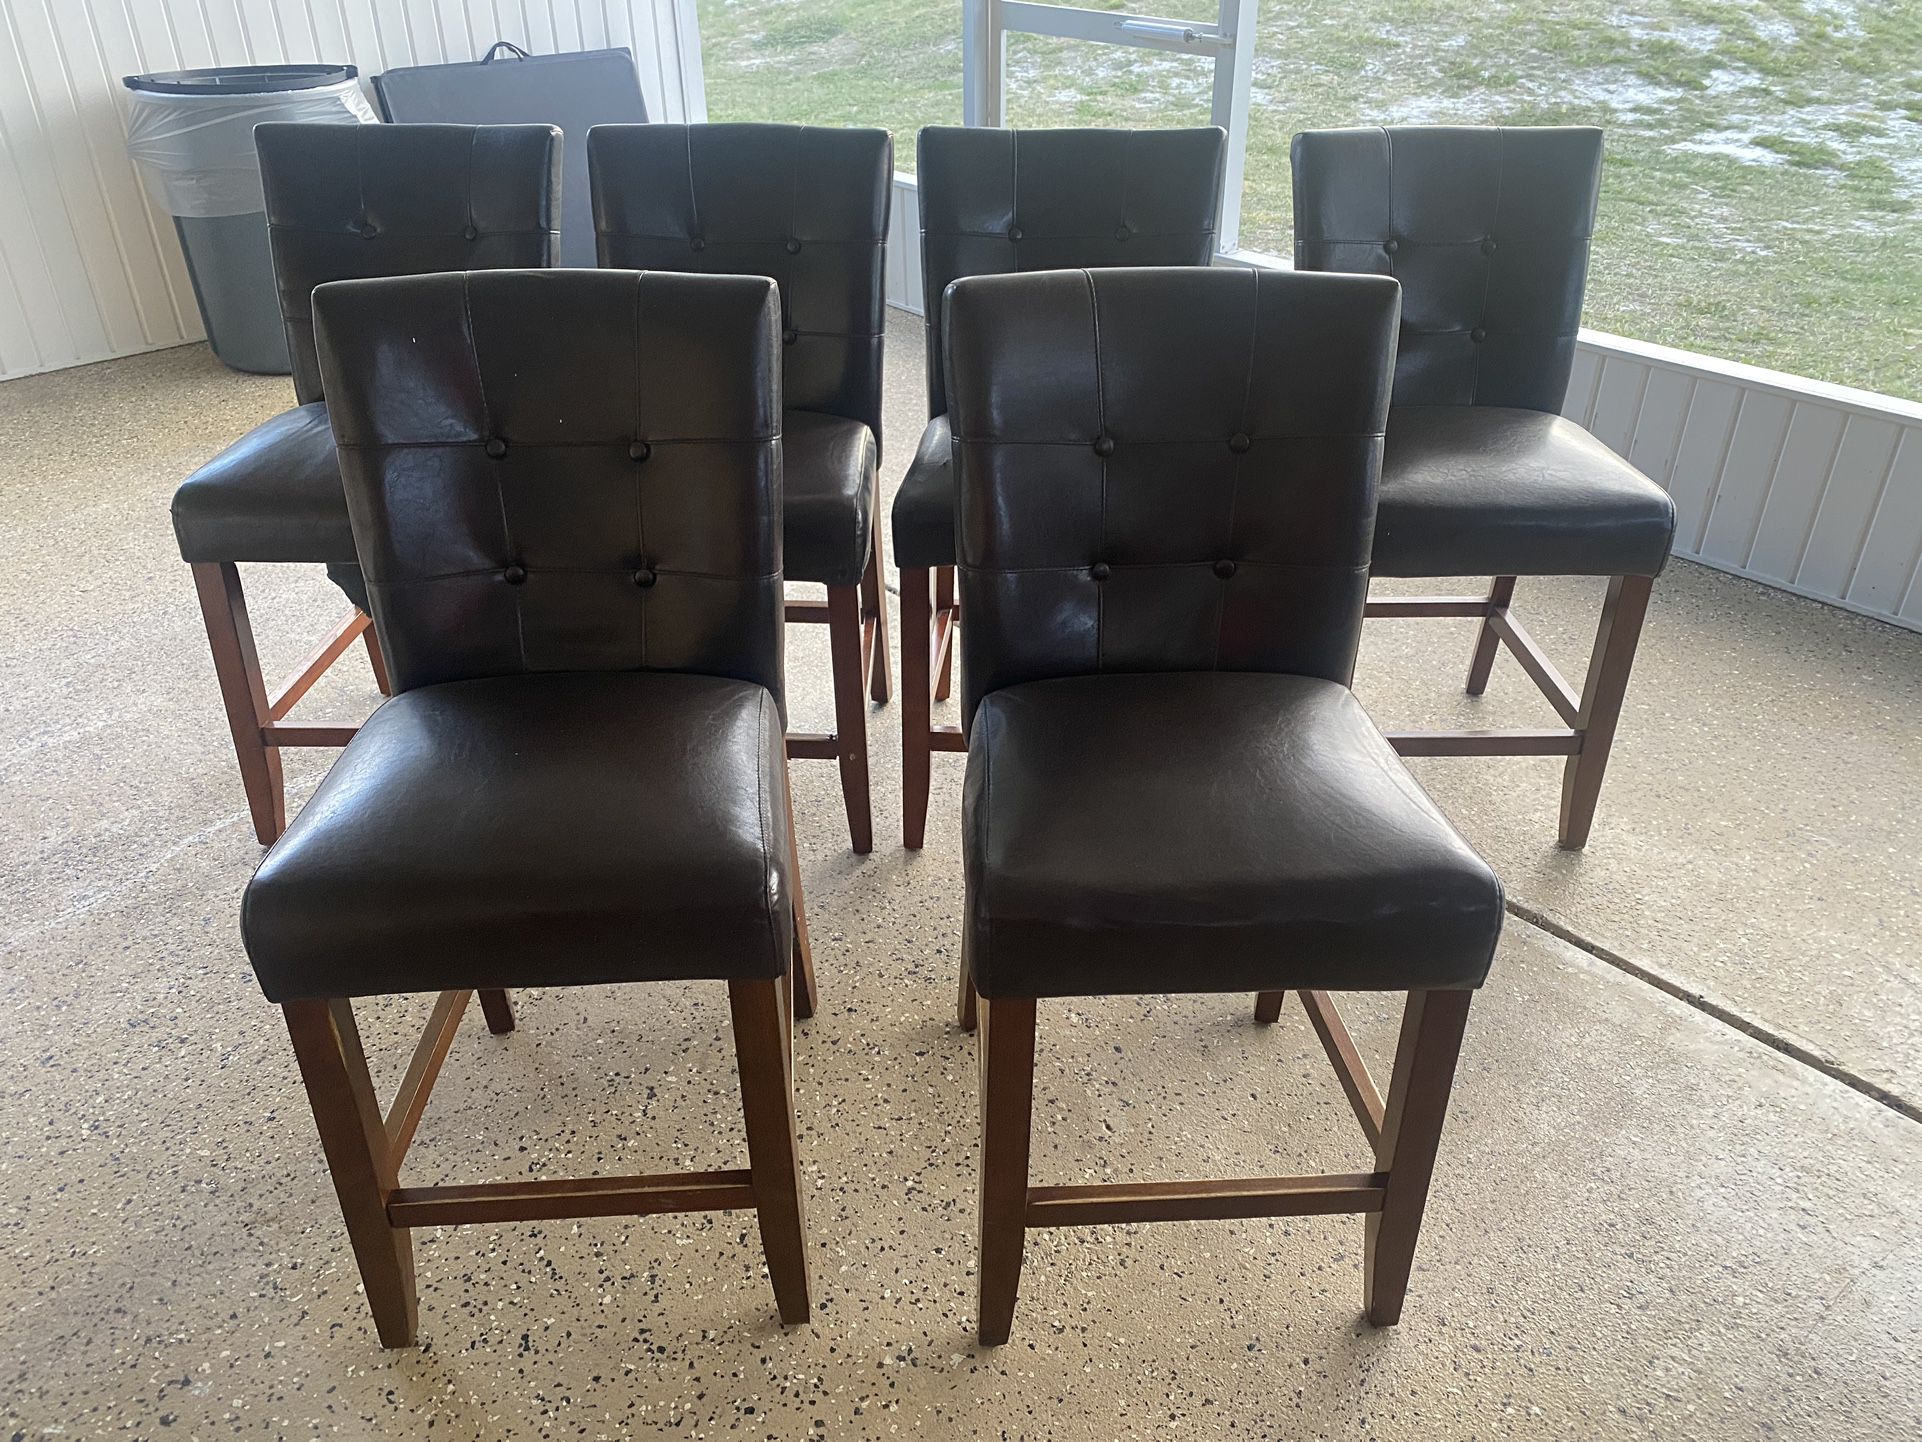 6 Chairs $150